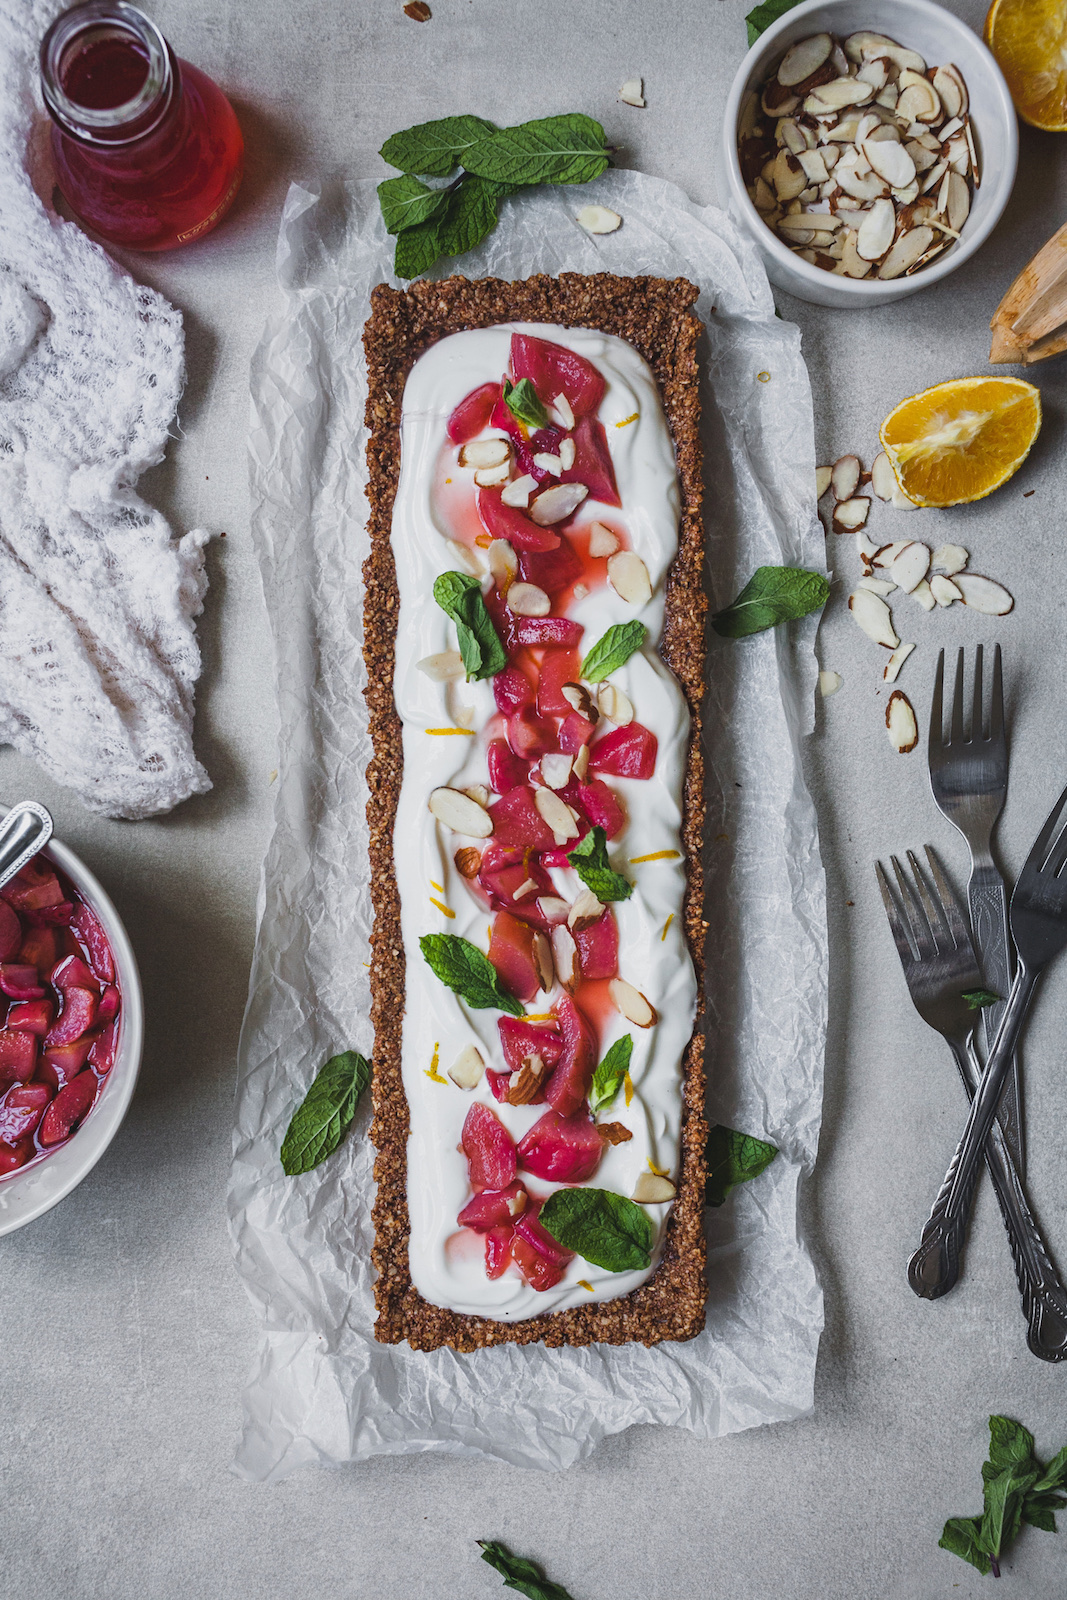 Greek Yoghurt Tart With a Poached Fruit Topping